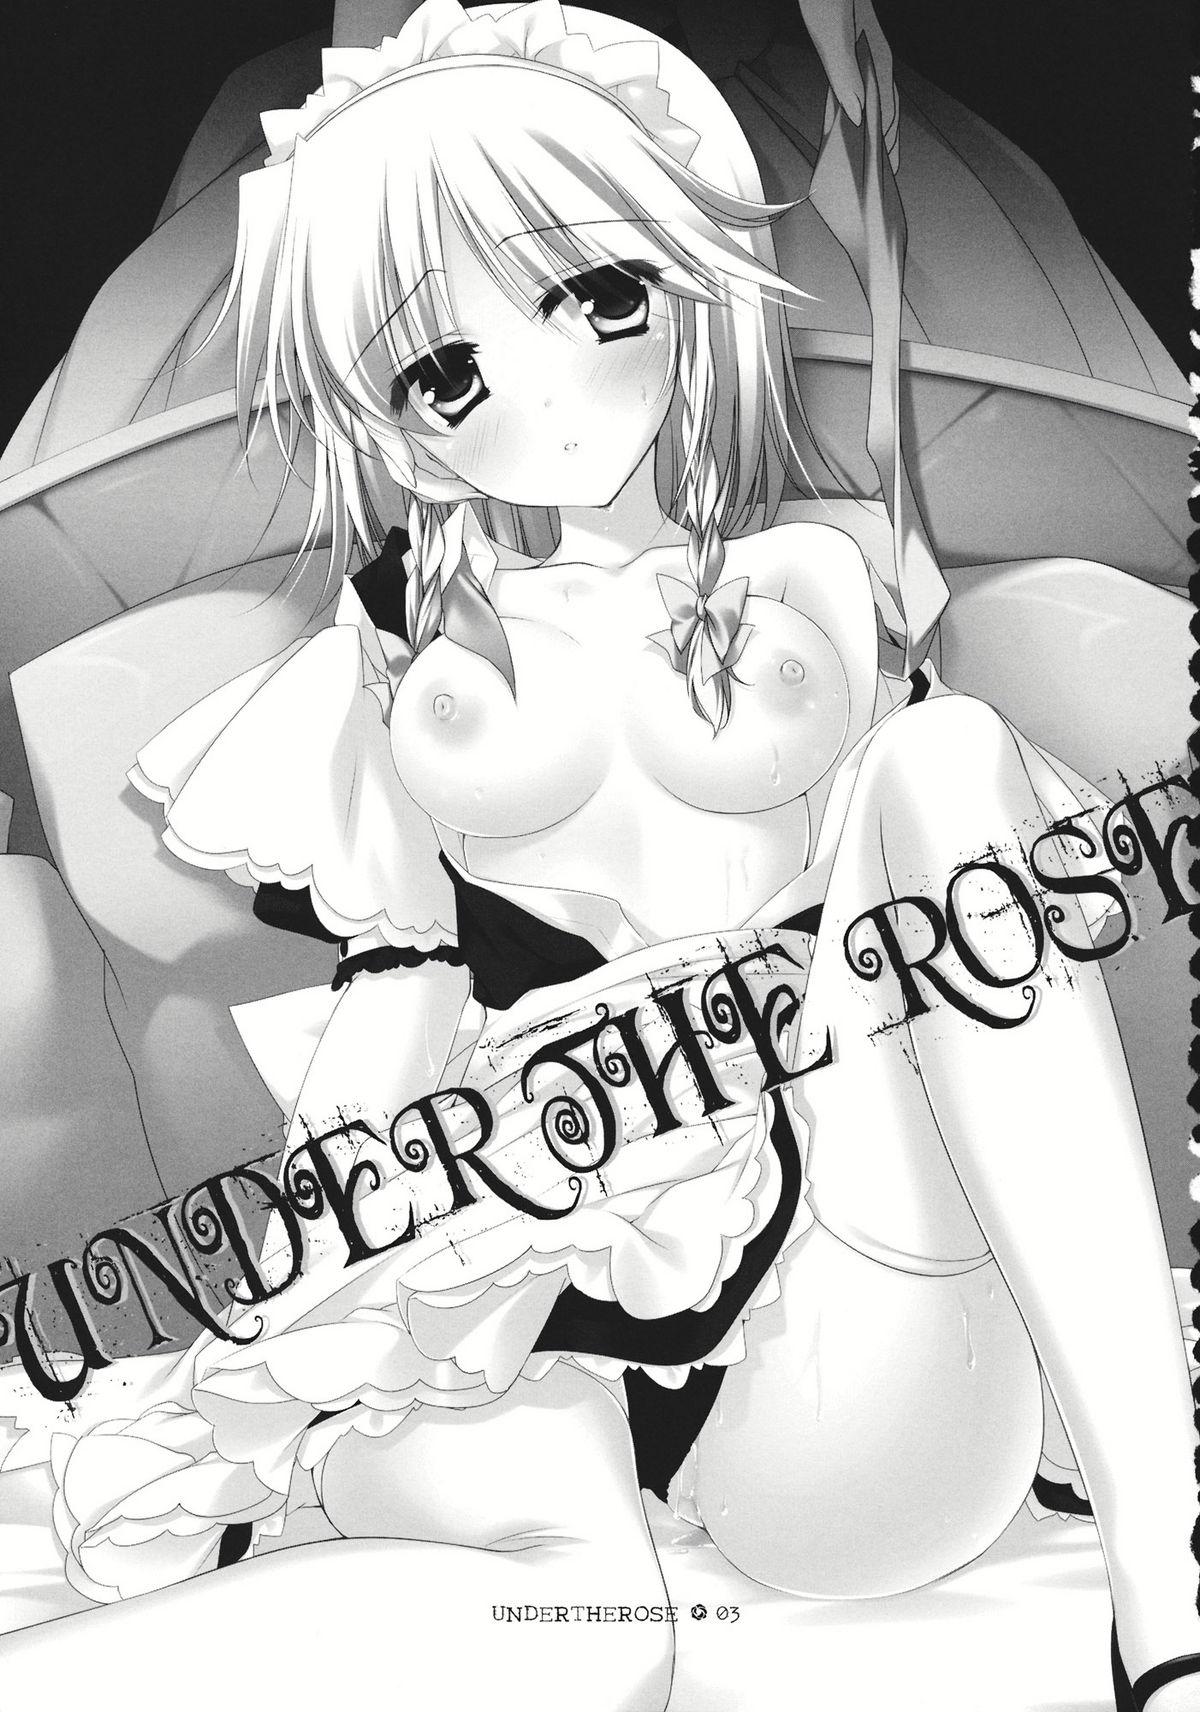 UNDER THE ROSE 2